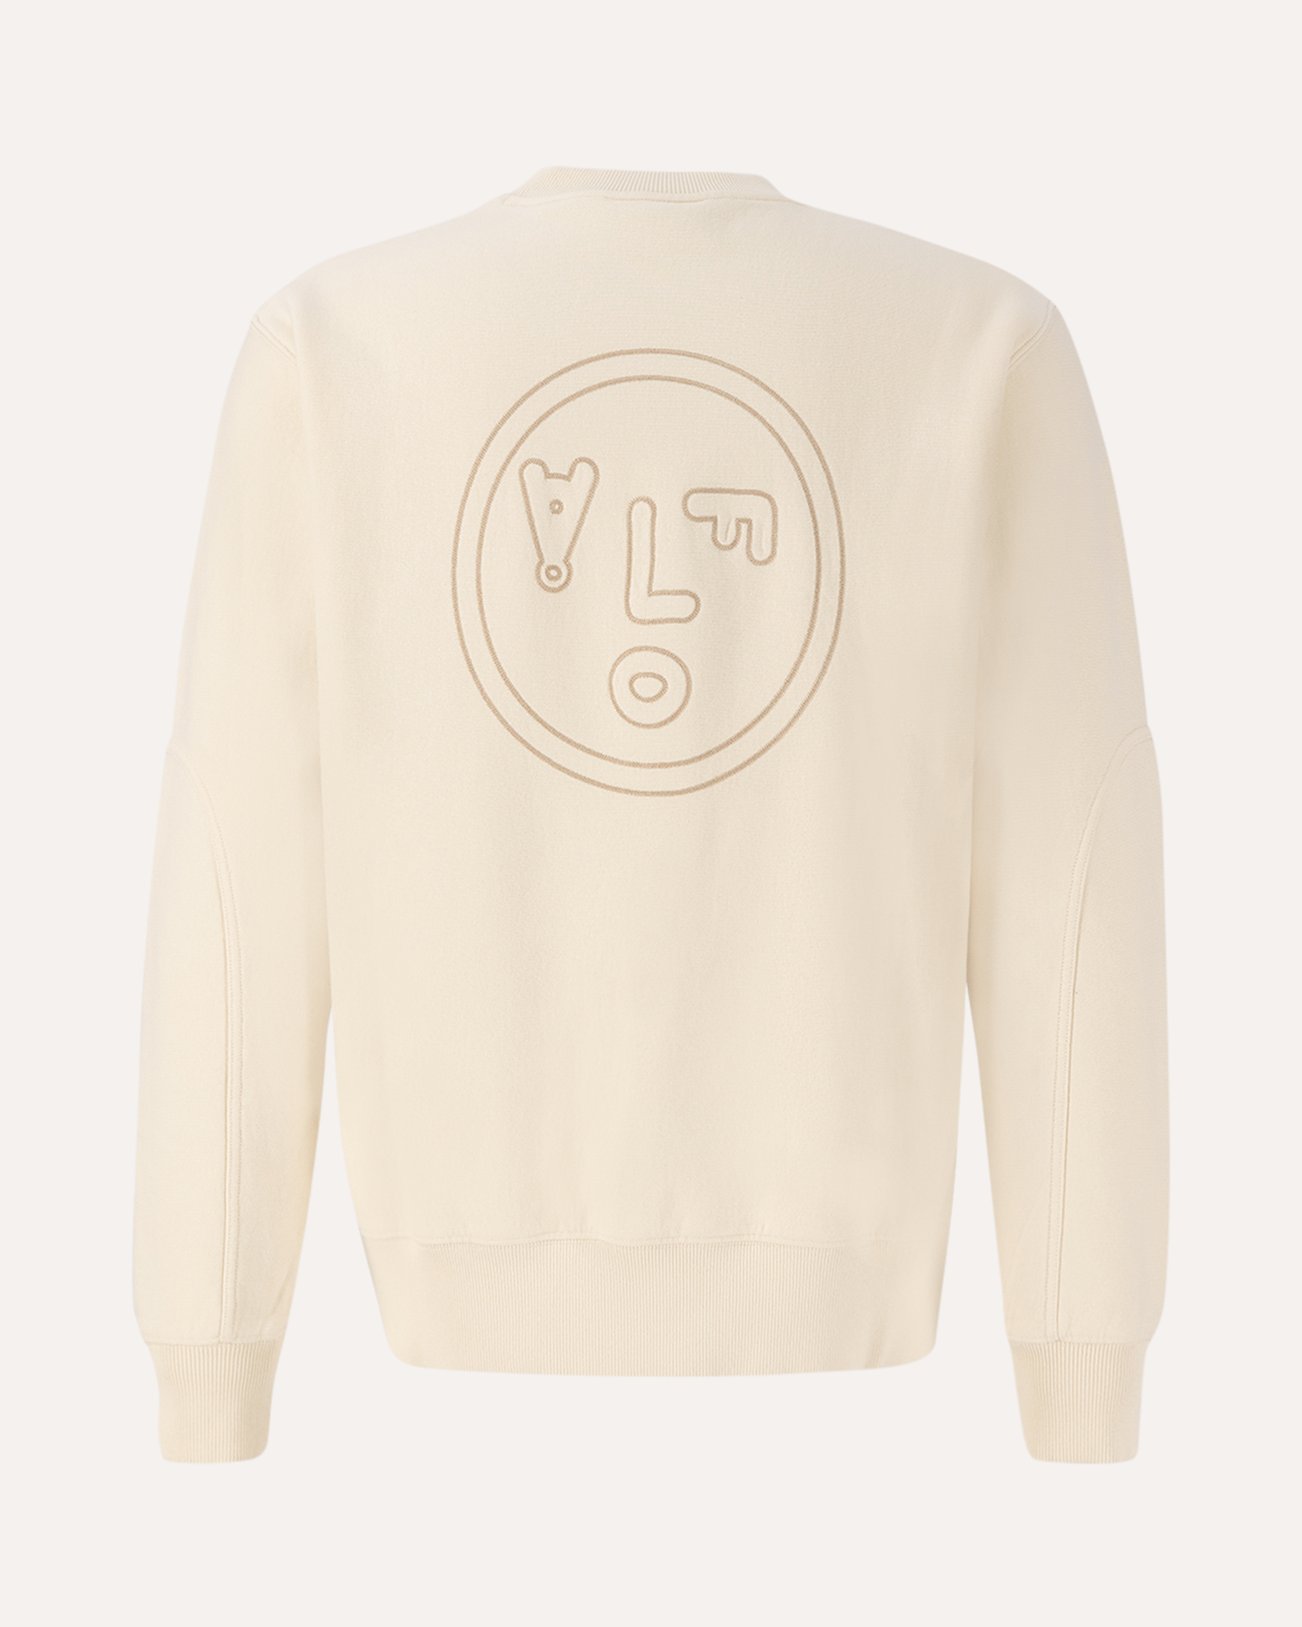 Olaf Hussein Face Chainstitch Crewneck OFFWHITE 1